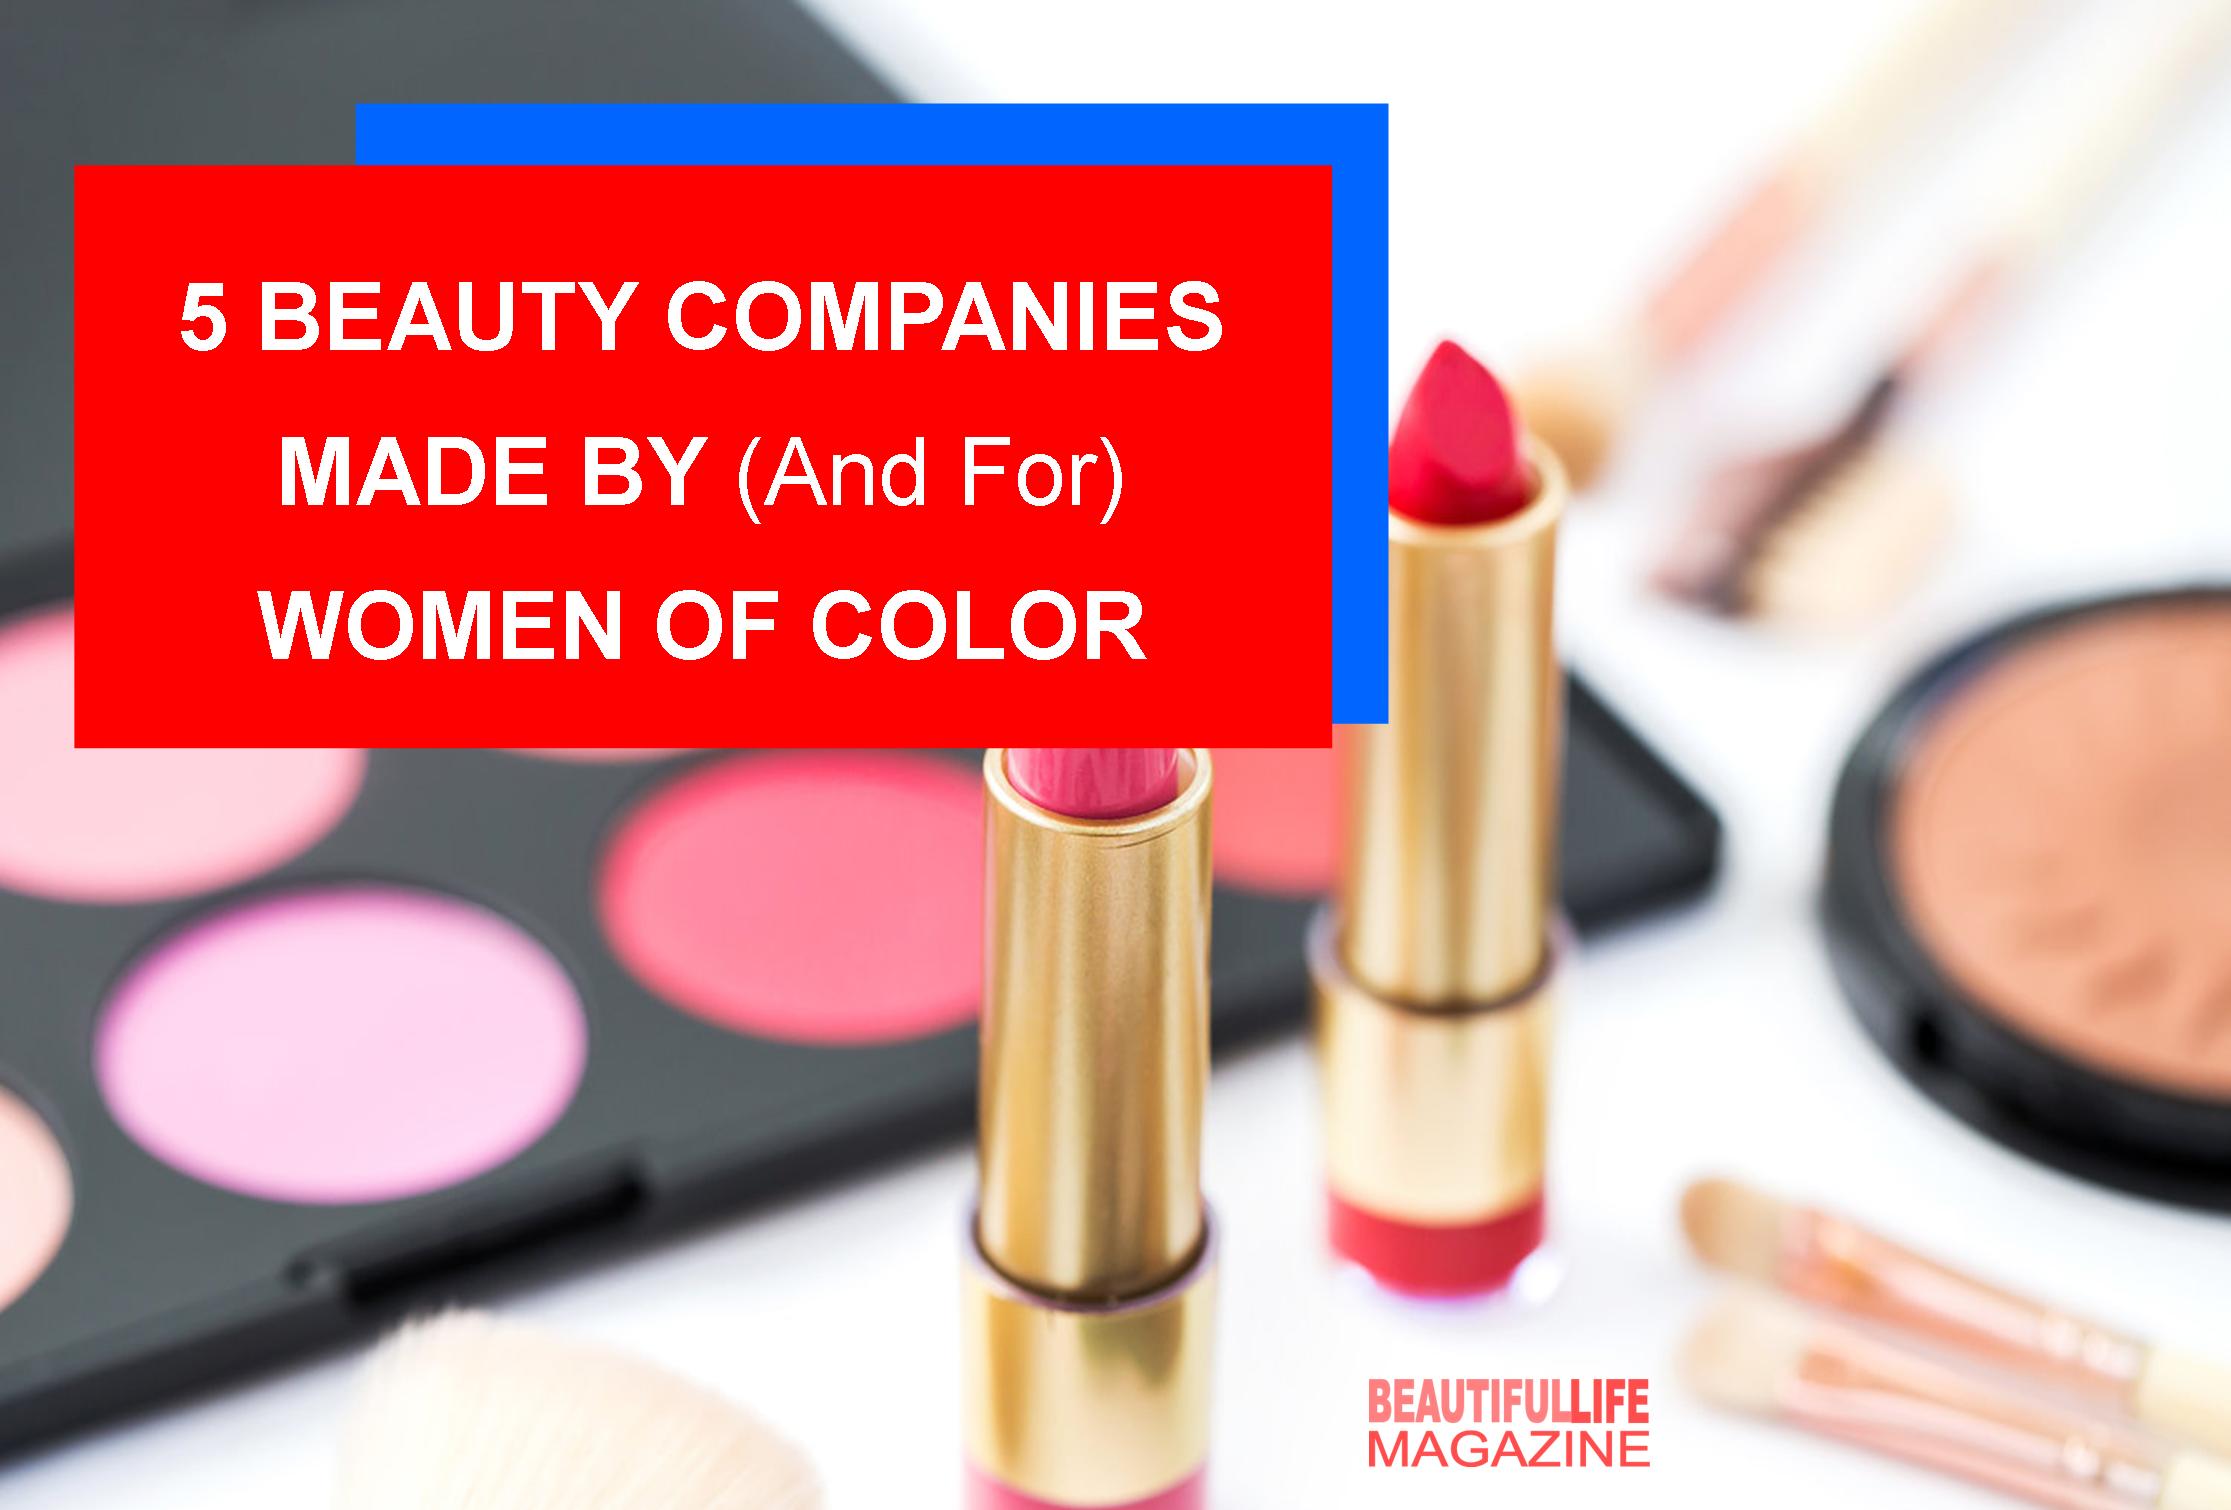 there are individuals and companies that are determined to provide better and more representation, to inspire women of color and their beauty needs, and provide individualized products that are made for them.